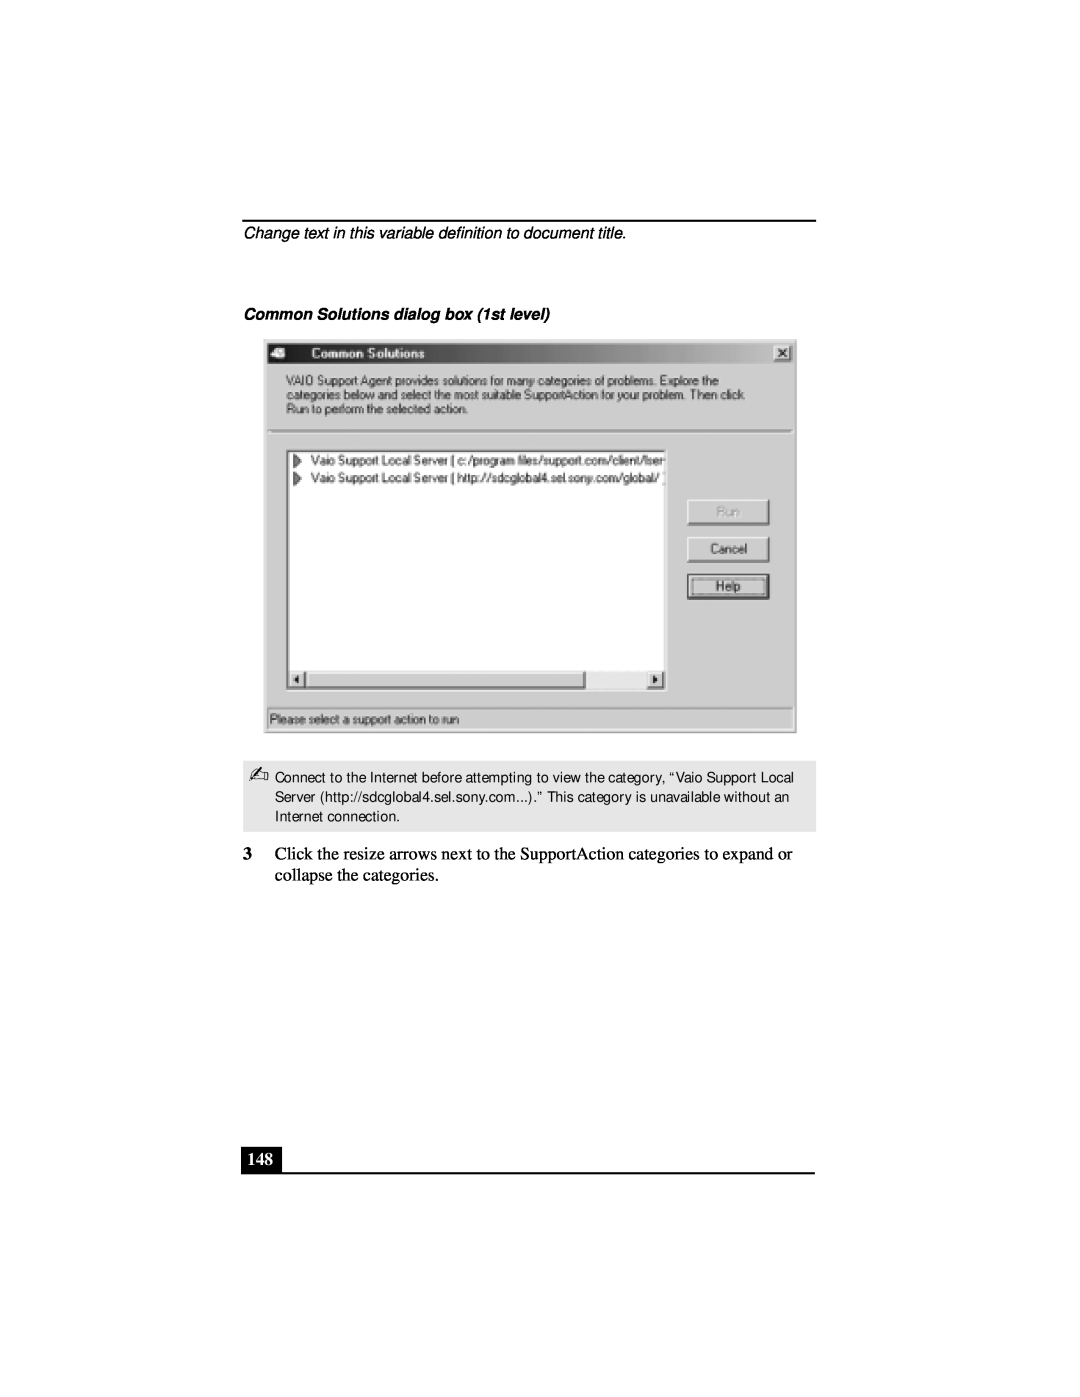 Sony Notebook Computer Change text in this variable definition to document title, Common Solutions dialog box 1st level 